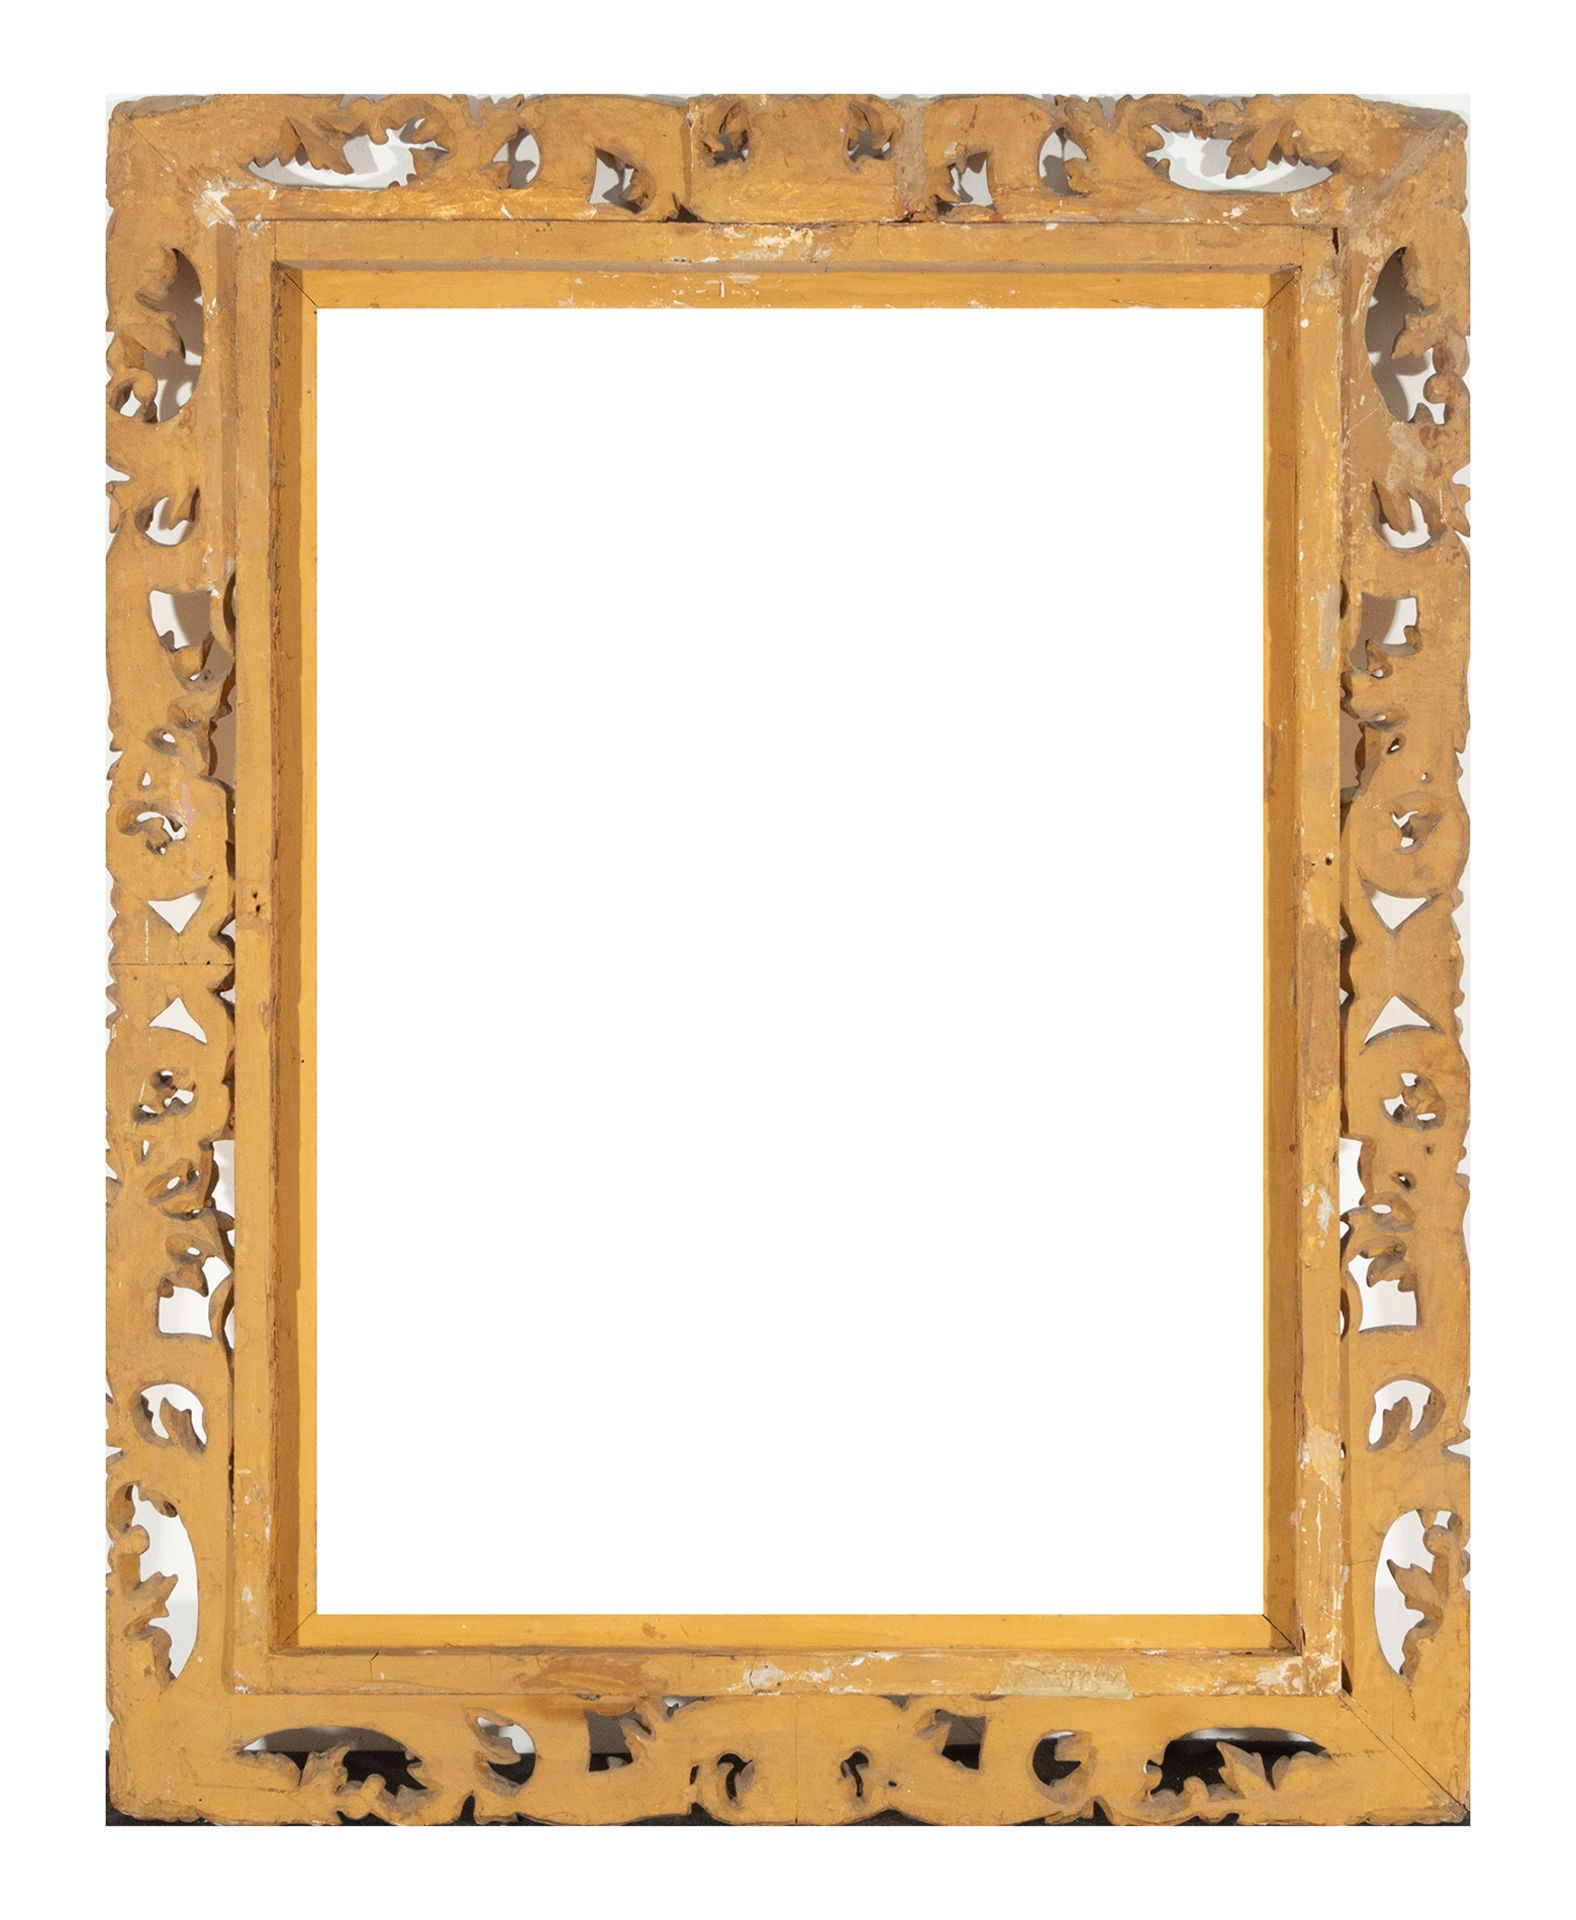 Elizabethan frame in carved and gilded wood, 19th century - Image 2 of 2